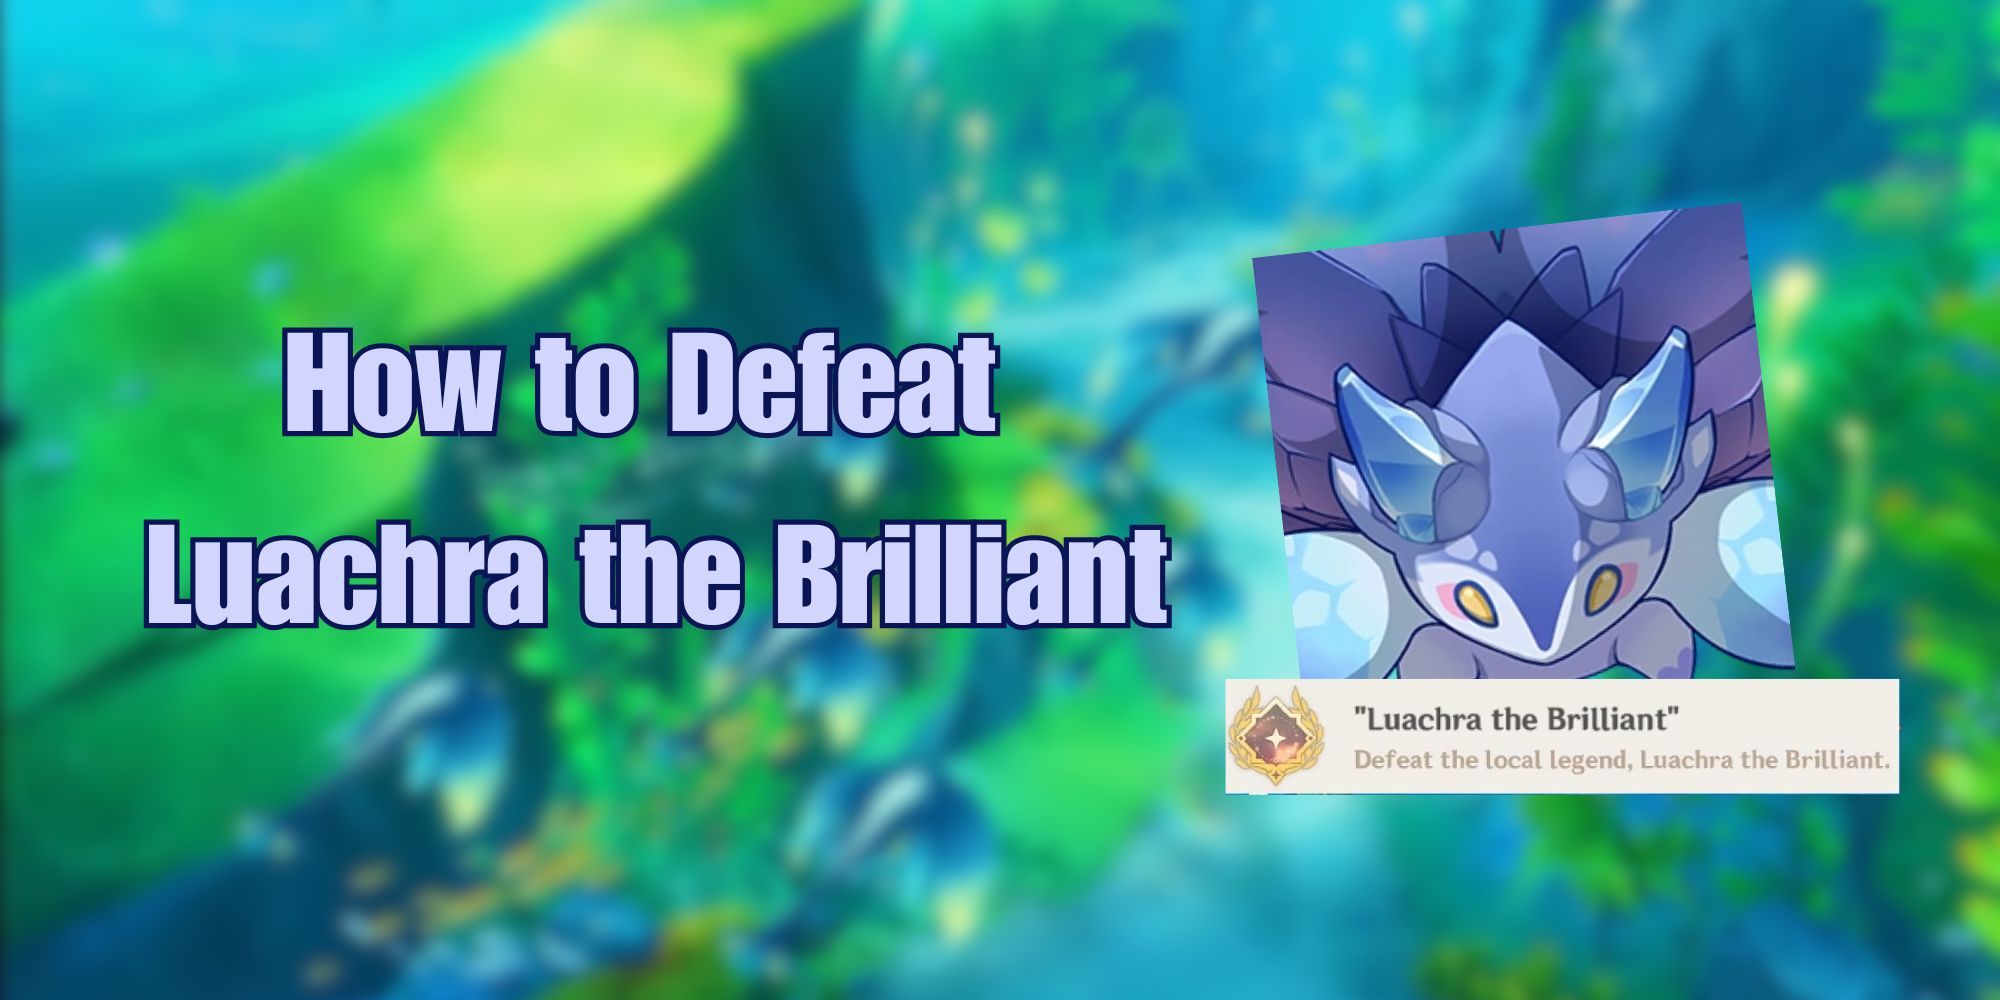 Genshin Impact- How to Find and Defeat Luachra the Brilliant (Fontaine Local Legend)